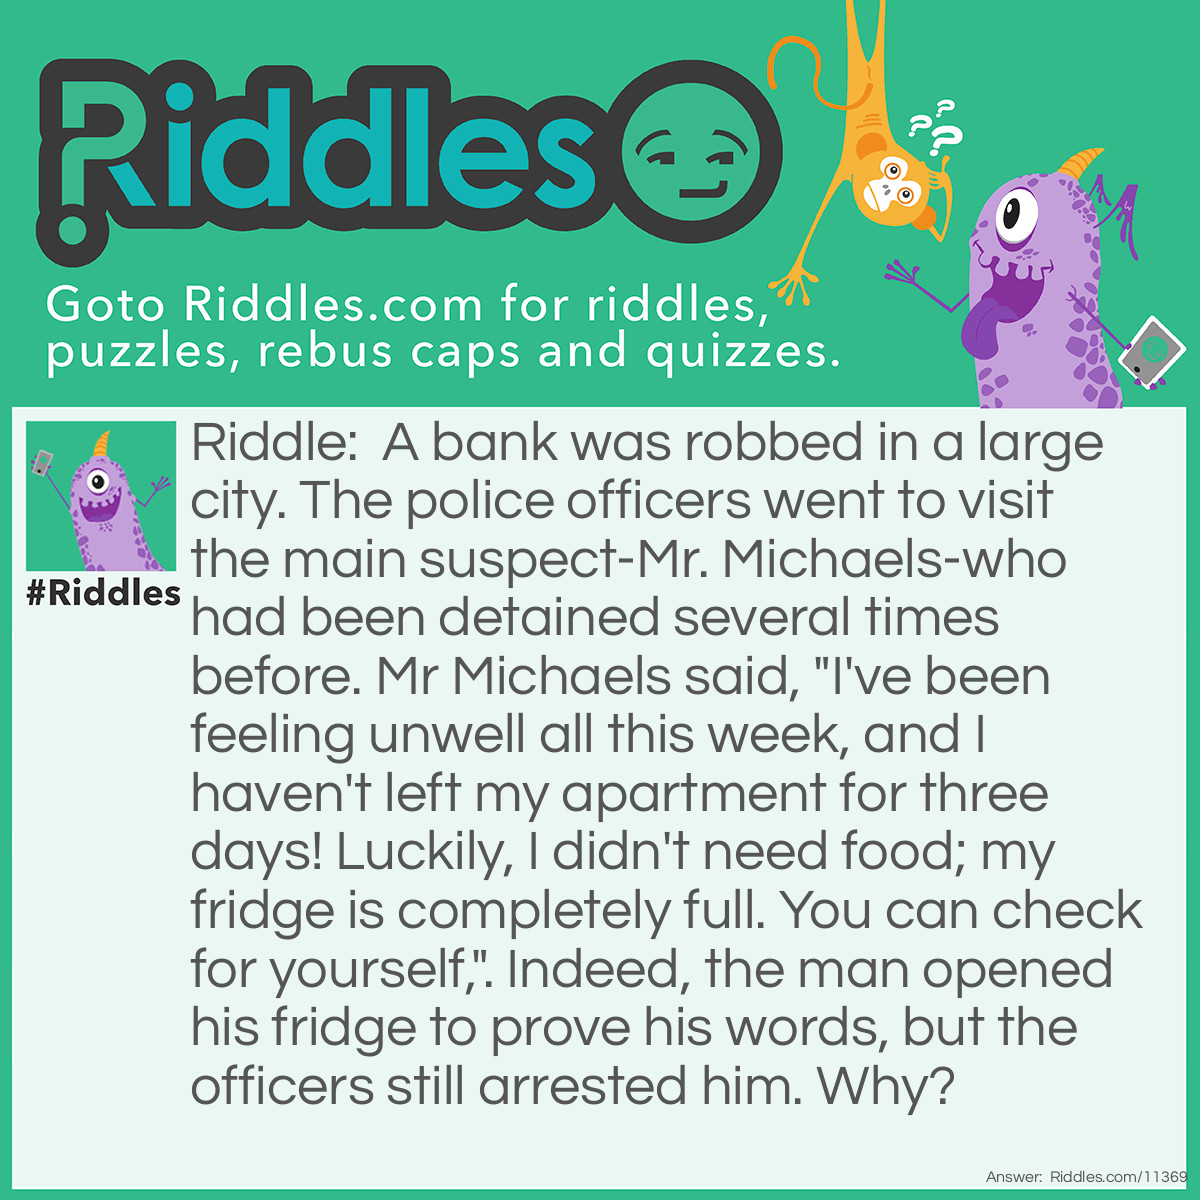 Riddle: A bank was robbed in a large city. The police officers went to visit the main suspect-Mr. Michaels-who had been detained several times before. Mr Michaels said, "I've been feeling unwell all this week, and I haven't left my apartment for three days! Luckily, I didn't need food; my fridge is completely full. You can check for yourself,". Indeed, the man opened his fridge to prove his words, but the officers still arrested him. Why? Answer: If Mr. Michaels had already been staying inside for three days, his fridge wouldn't be so full…simply because we need to EAT in order to survive. It's not likely that Mr. Michaels would be doing too well after not eating for three days.